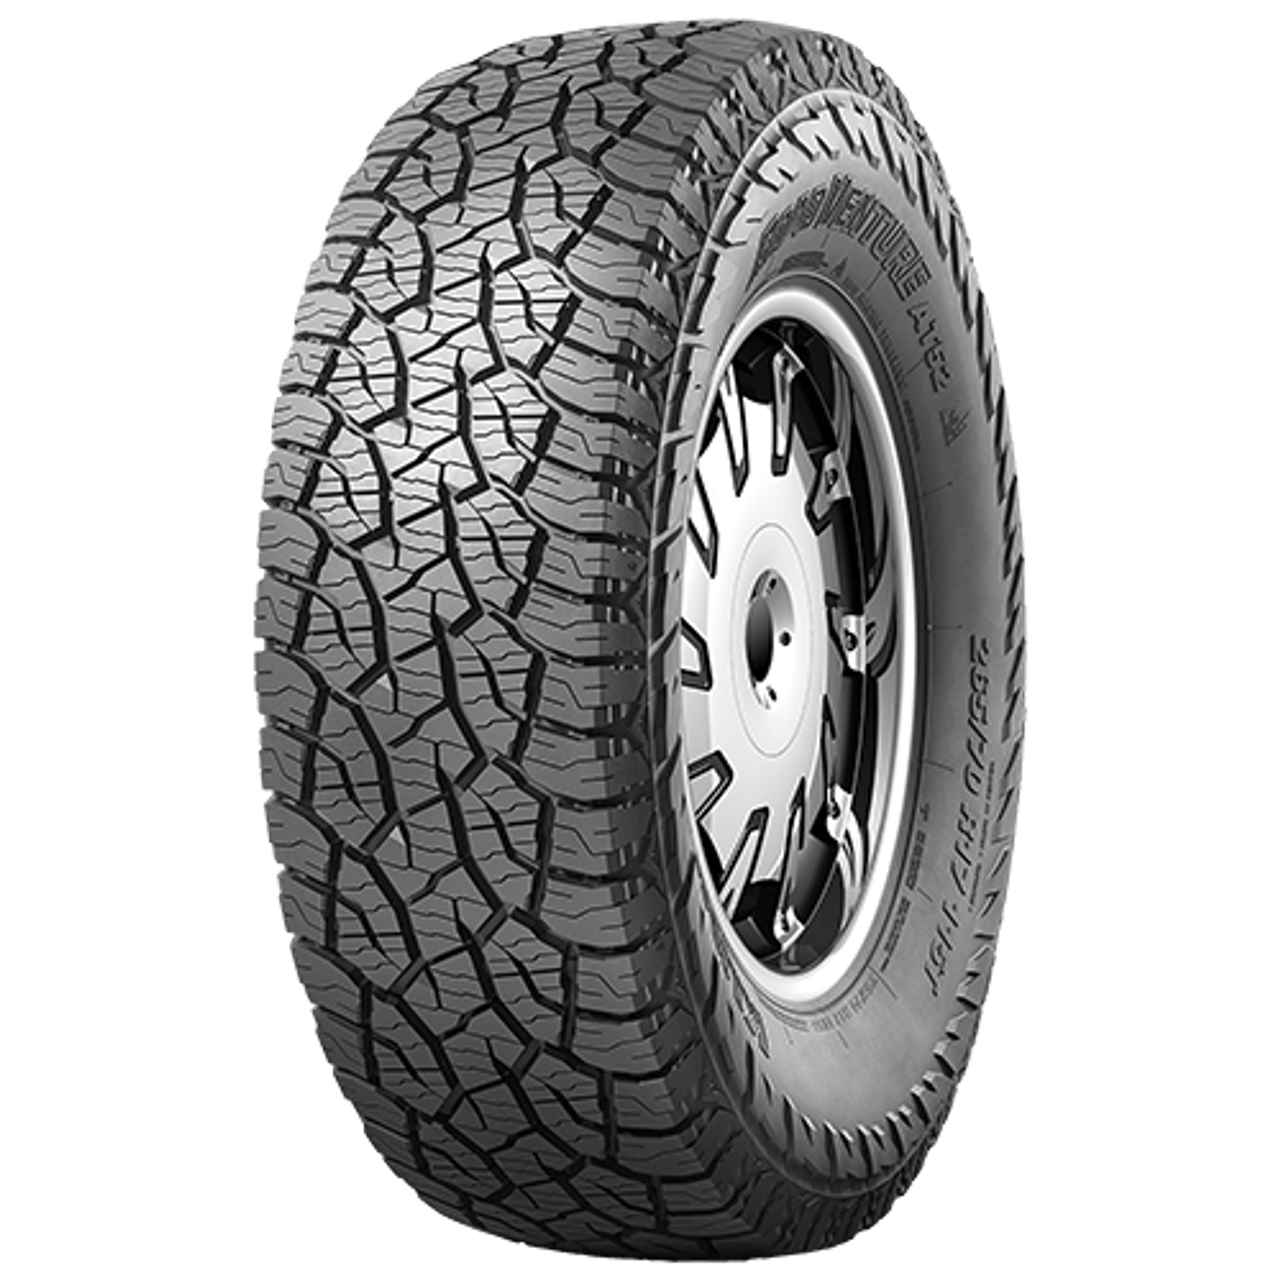 KUMHO ROAD VENTURE AT52 255/70R17 112T BSW